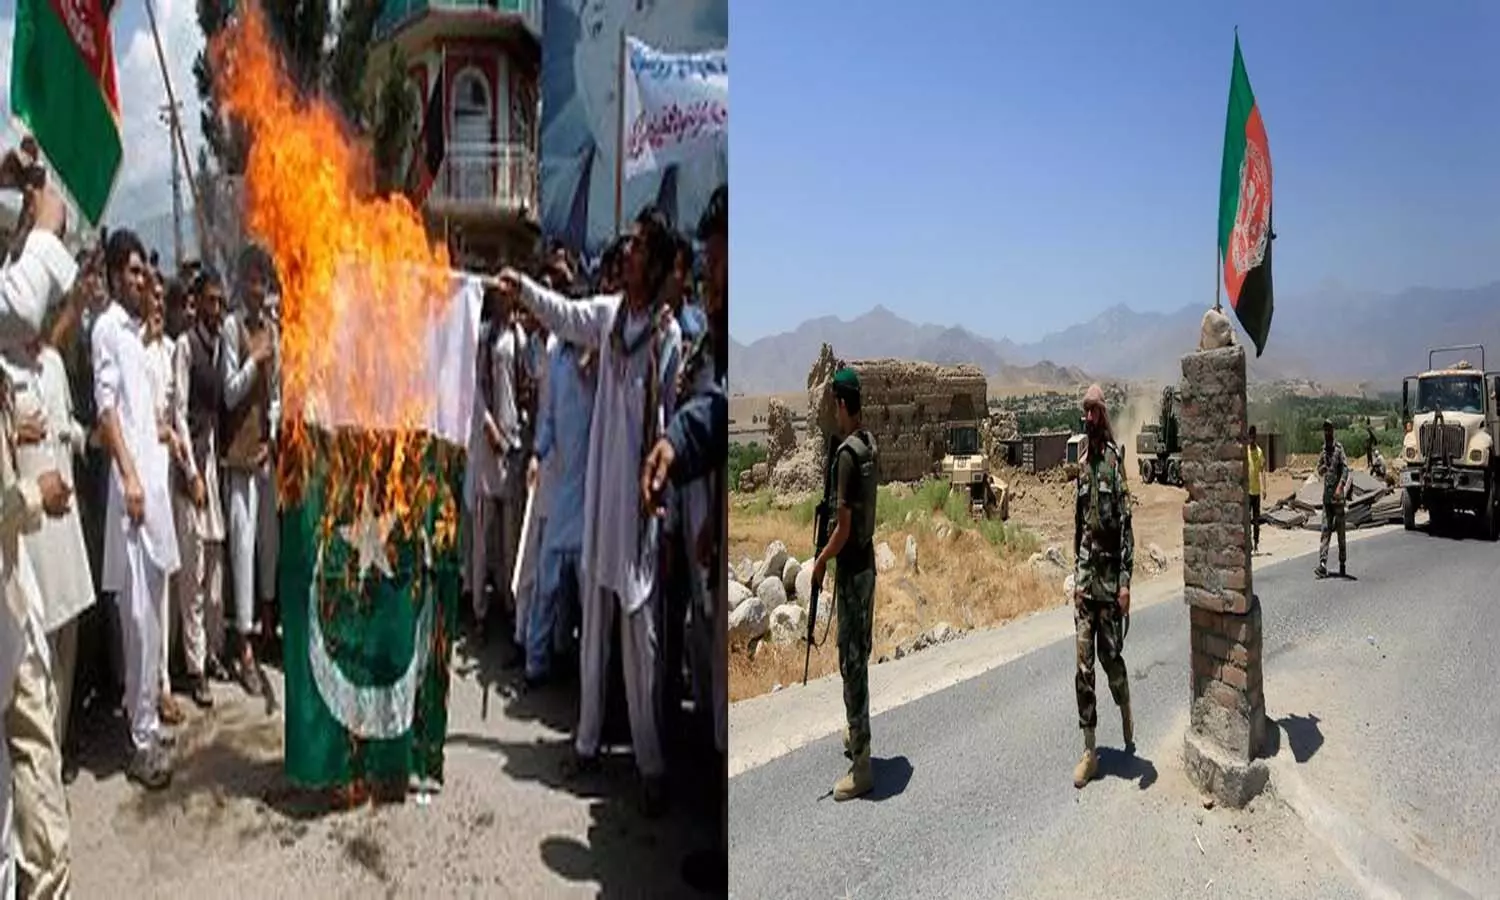 War-like situation between Afghanistan and Pakistan, situation worsened due to Tehreek Taliban